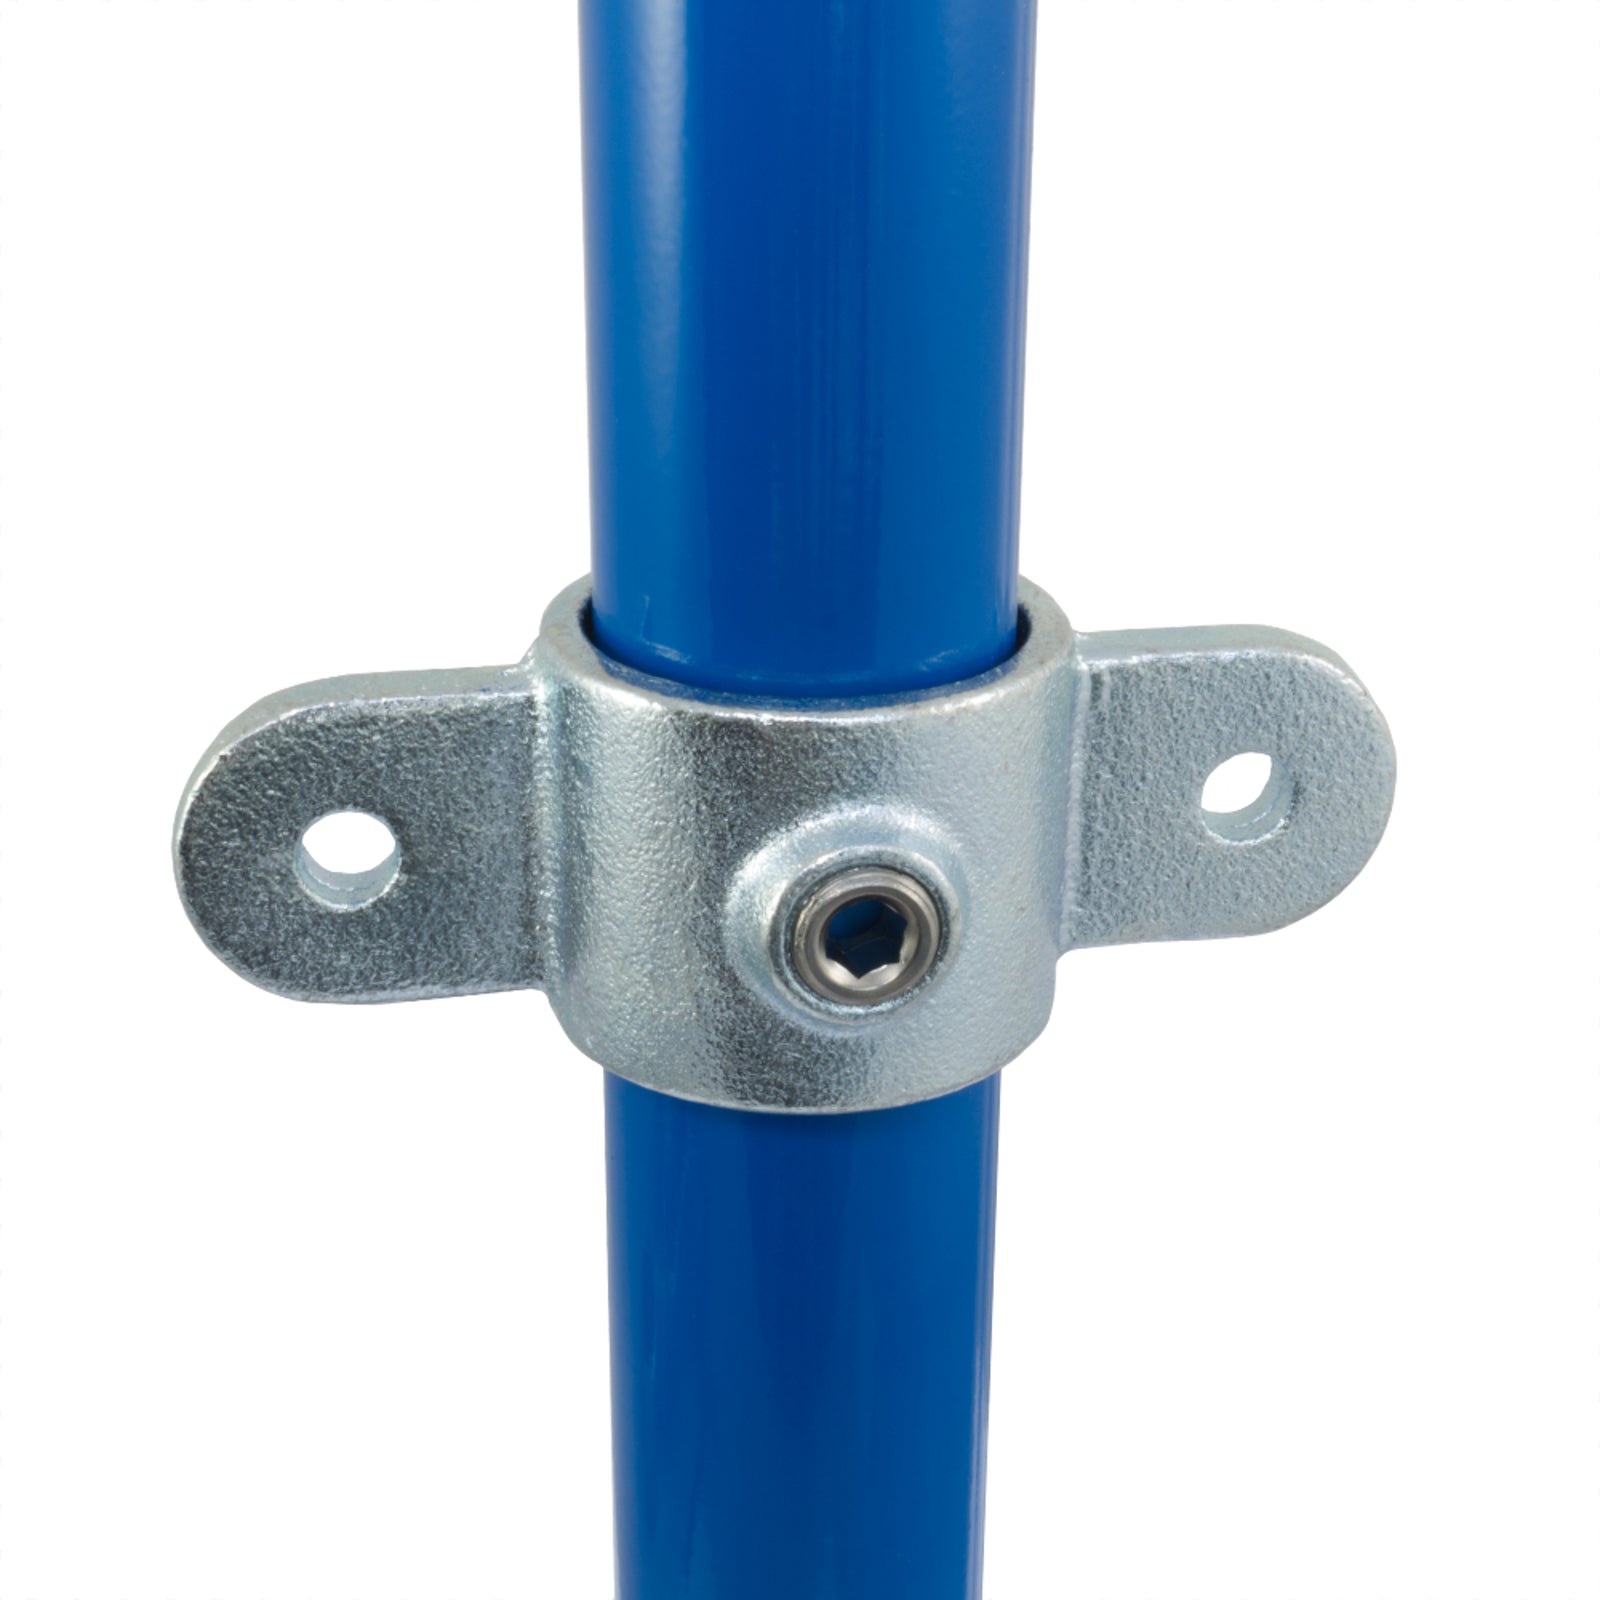 Double Swivel Combination Male Part, Interclamp Code 167M. Shop rail, pipe and fence fittings online chain.com.au. Australia wide shipping.